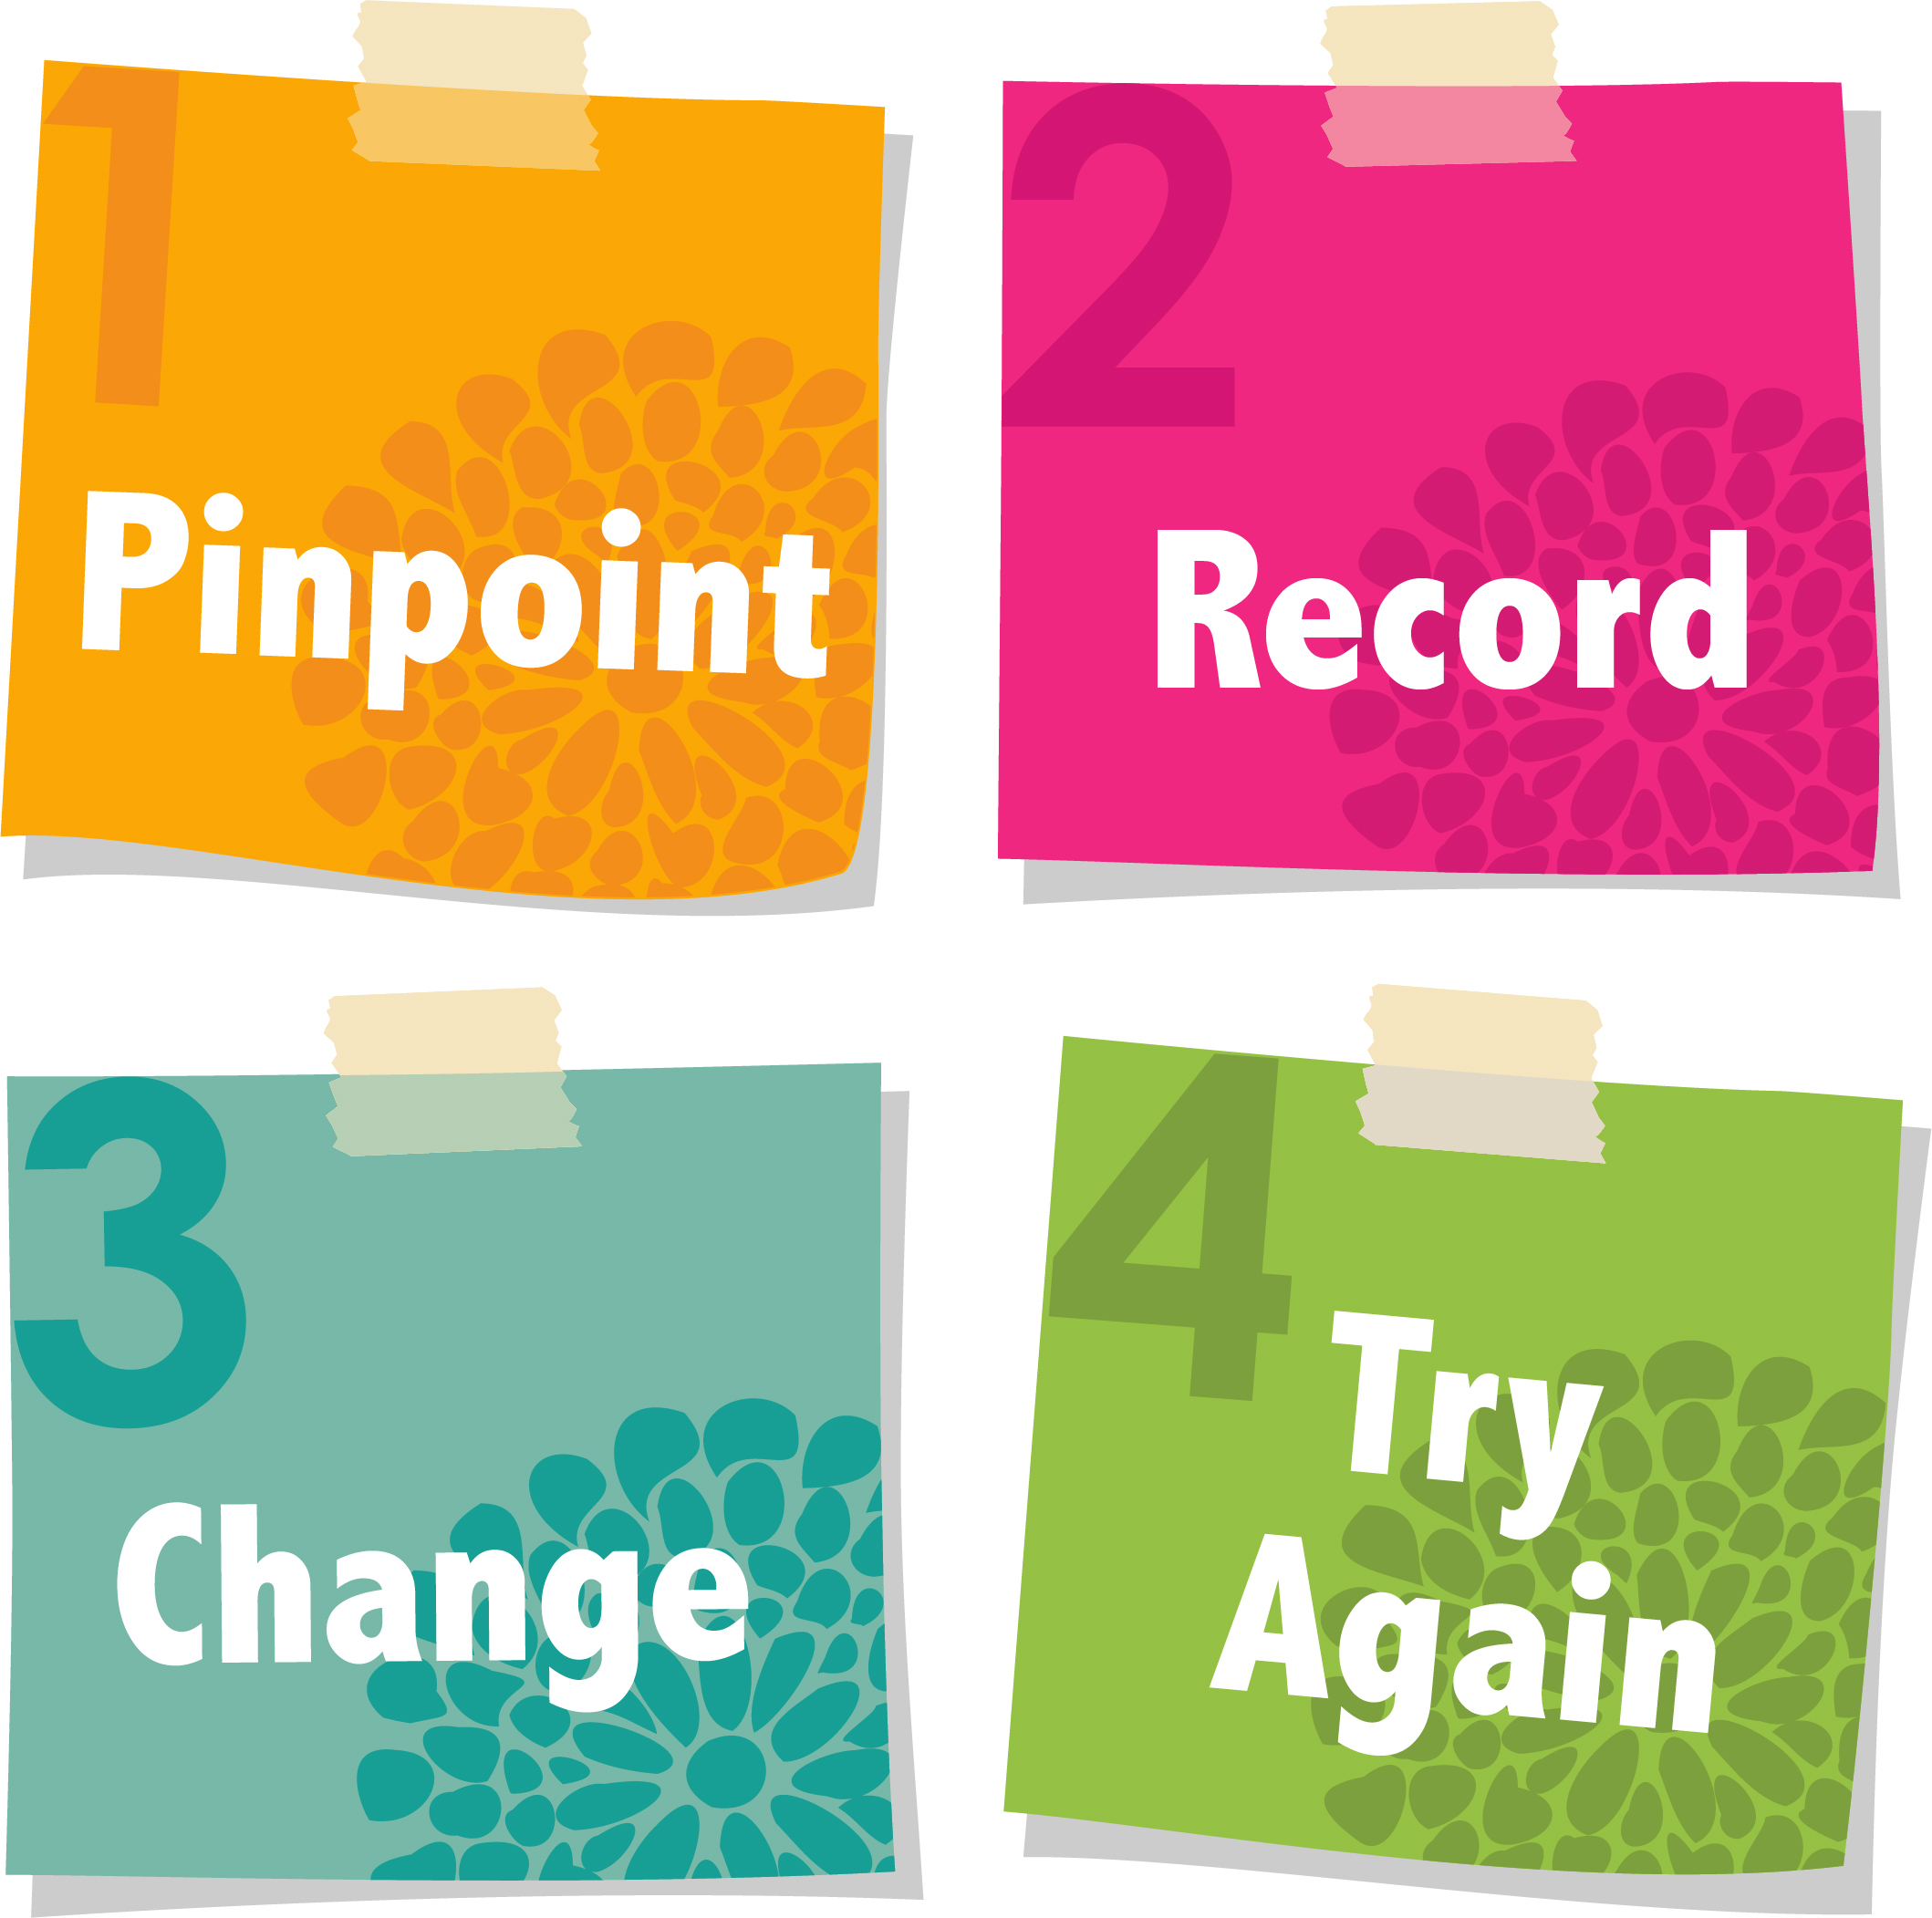 1. pinpoint, 2. record, 3. change, 4. try again (graphic)